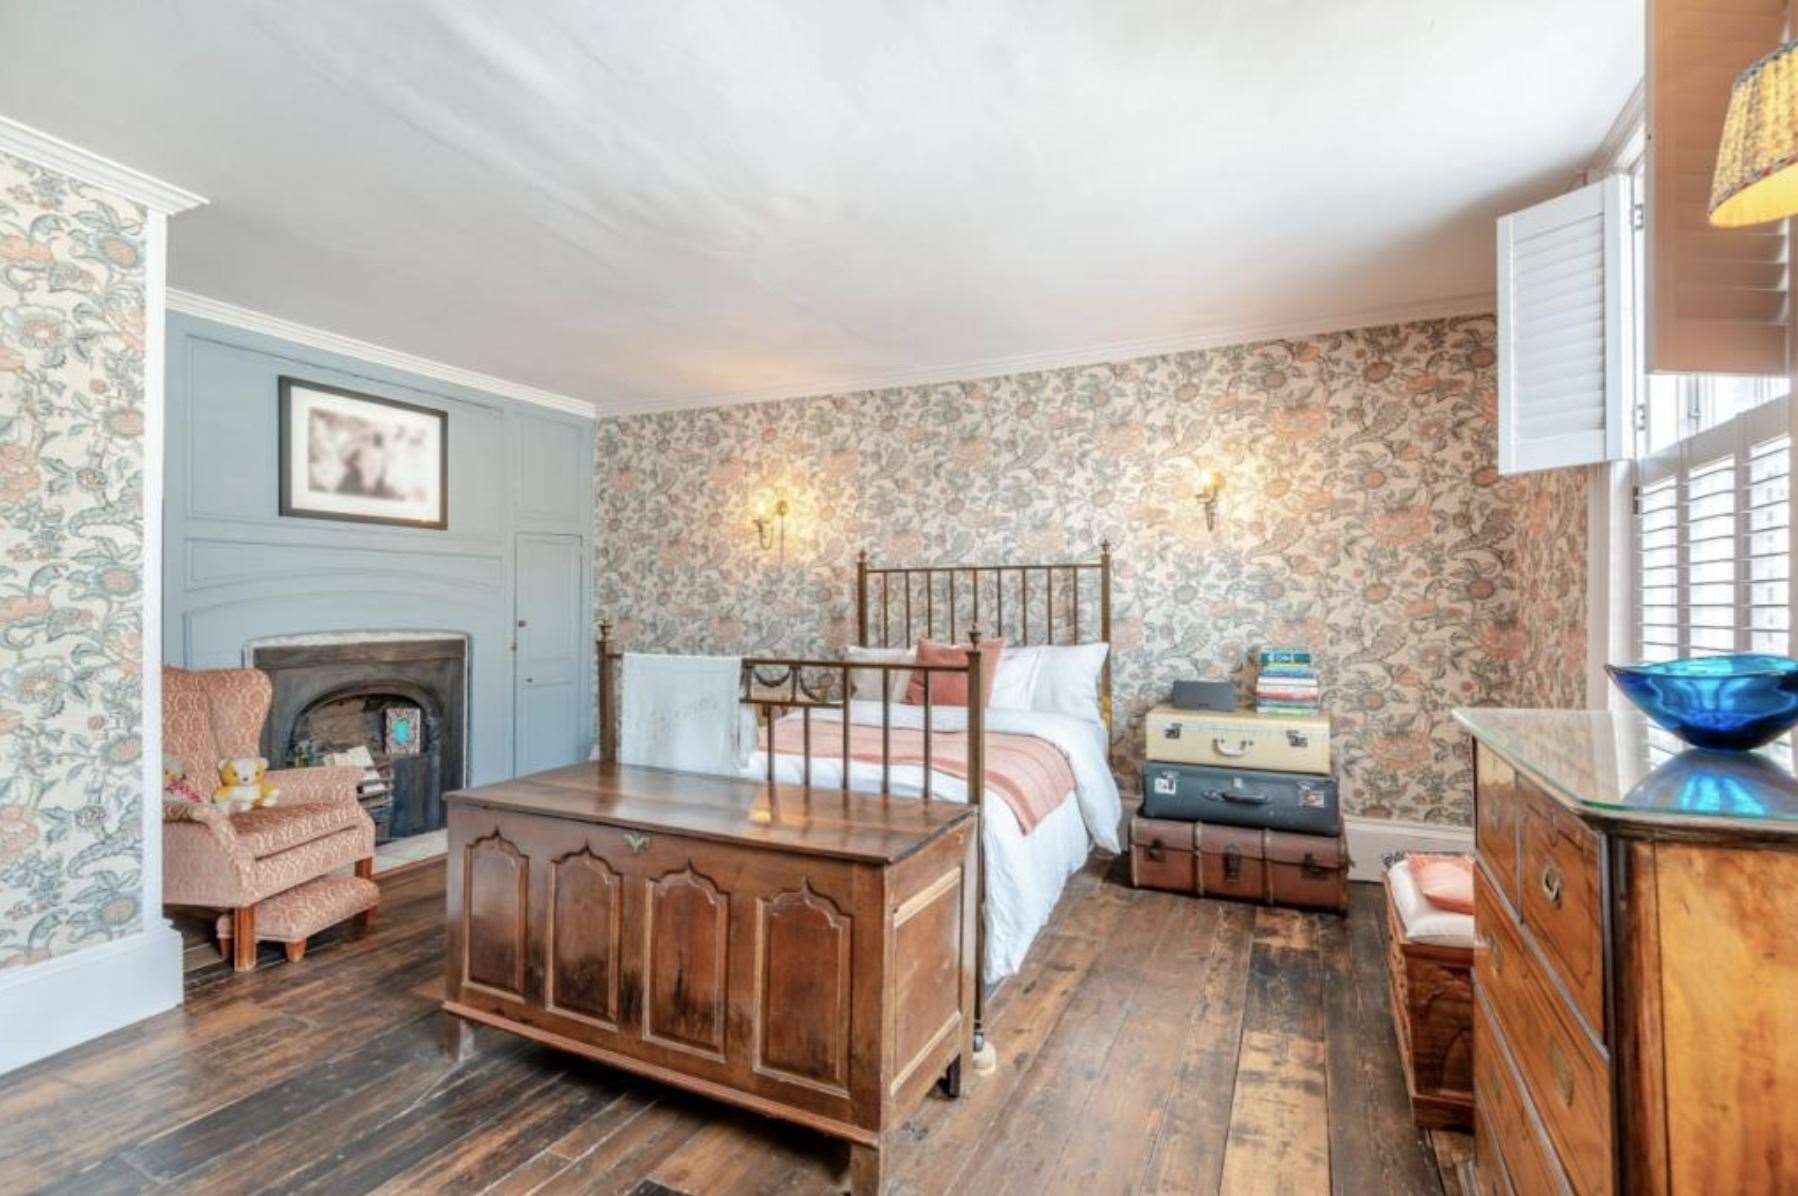 The property has six bedrooms. Picture: Strutt & Parker